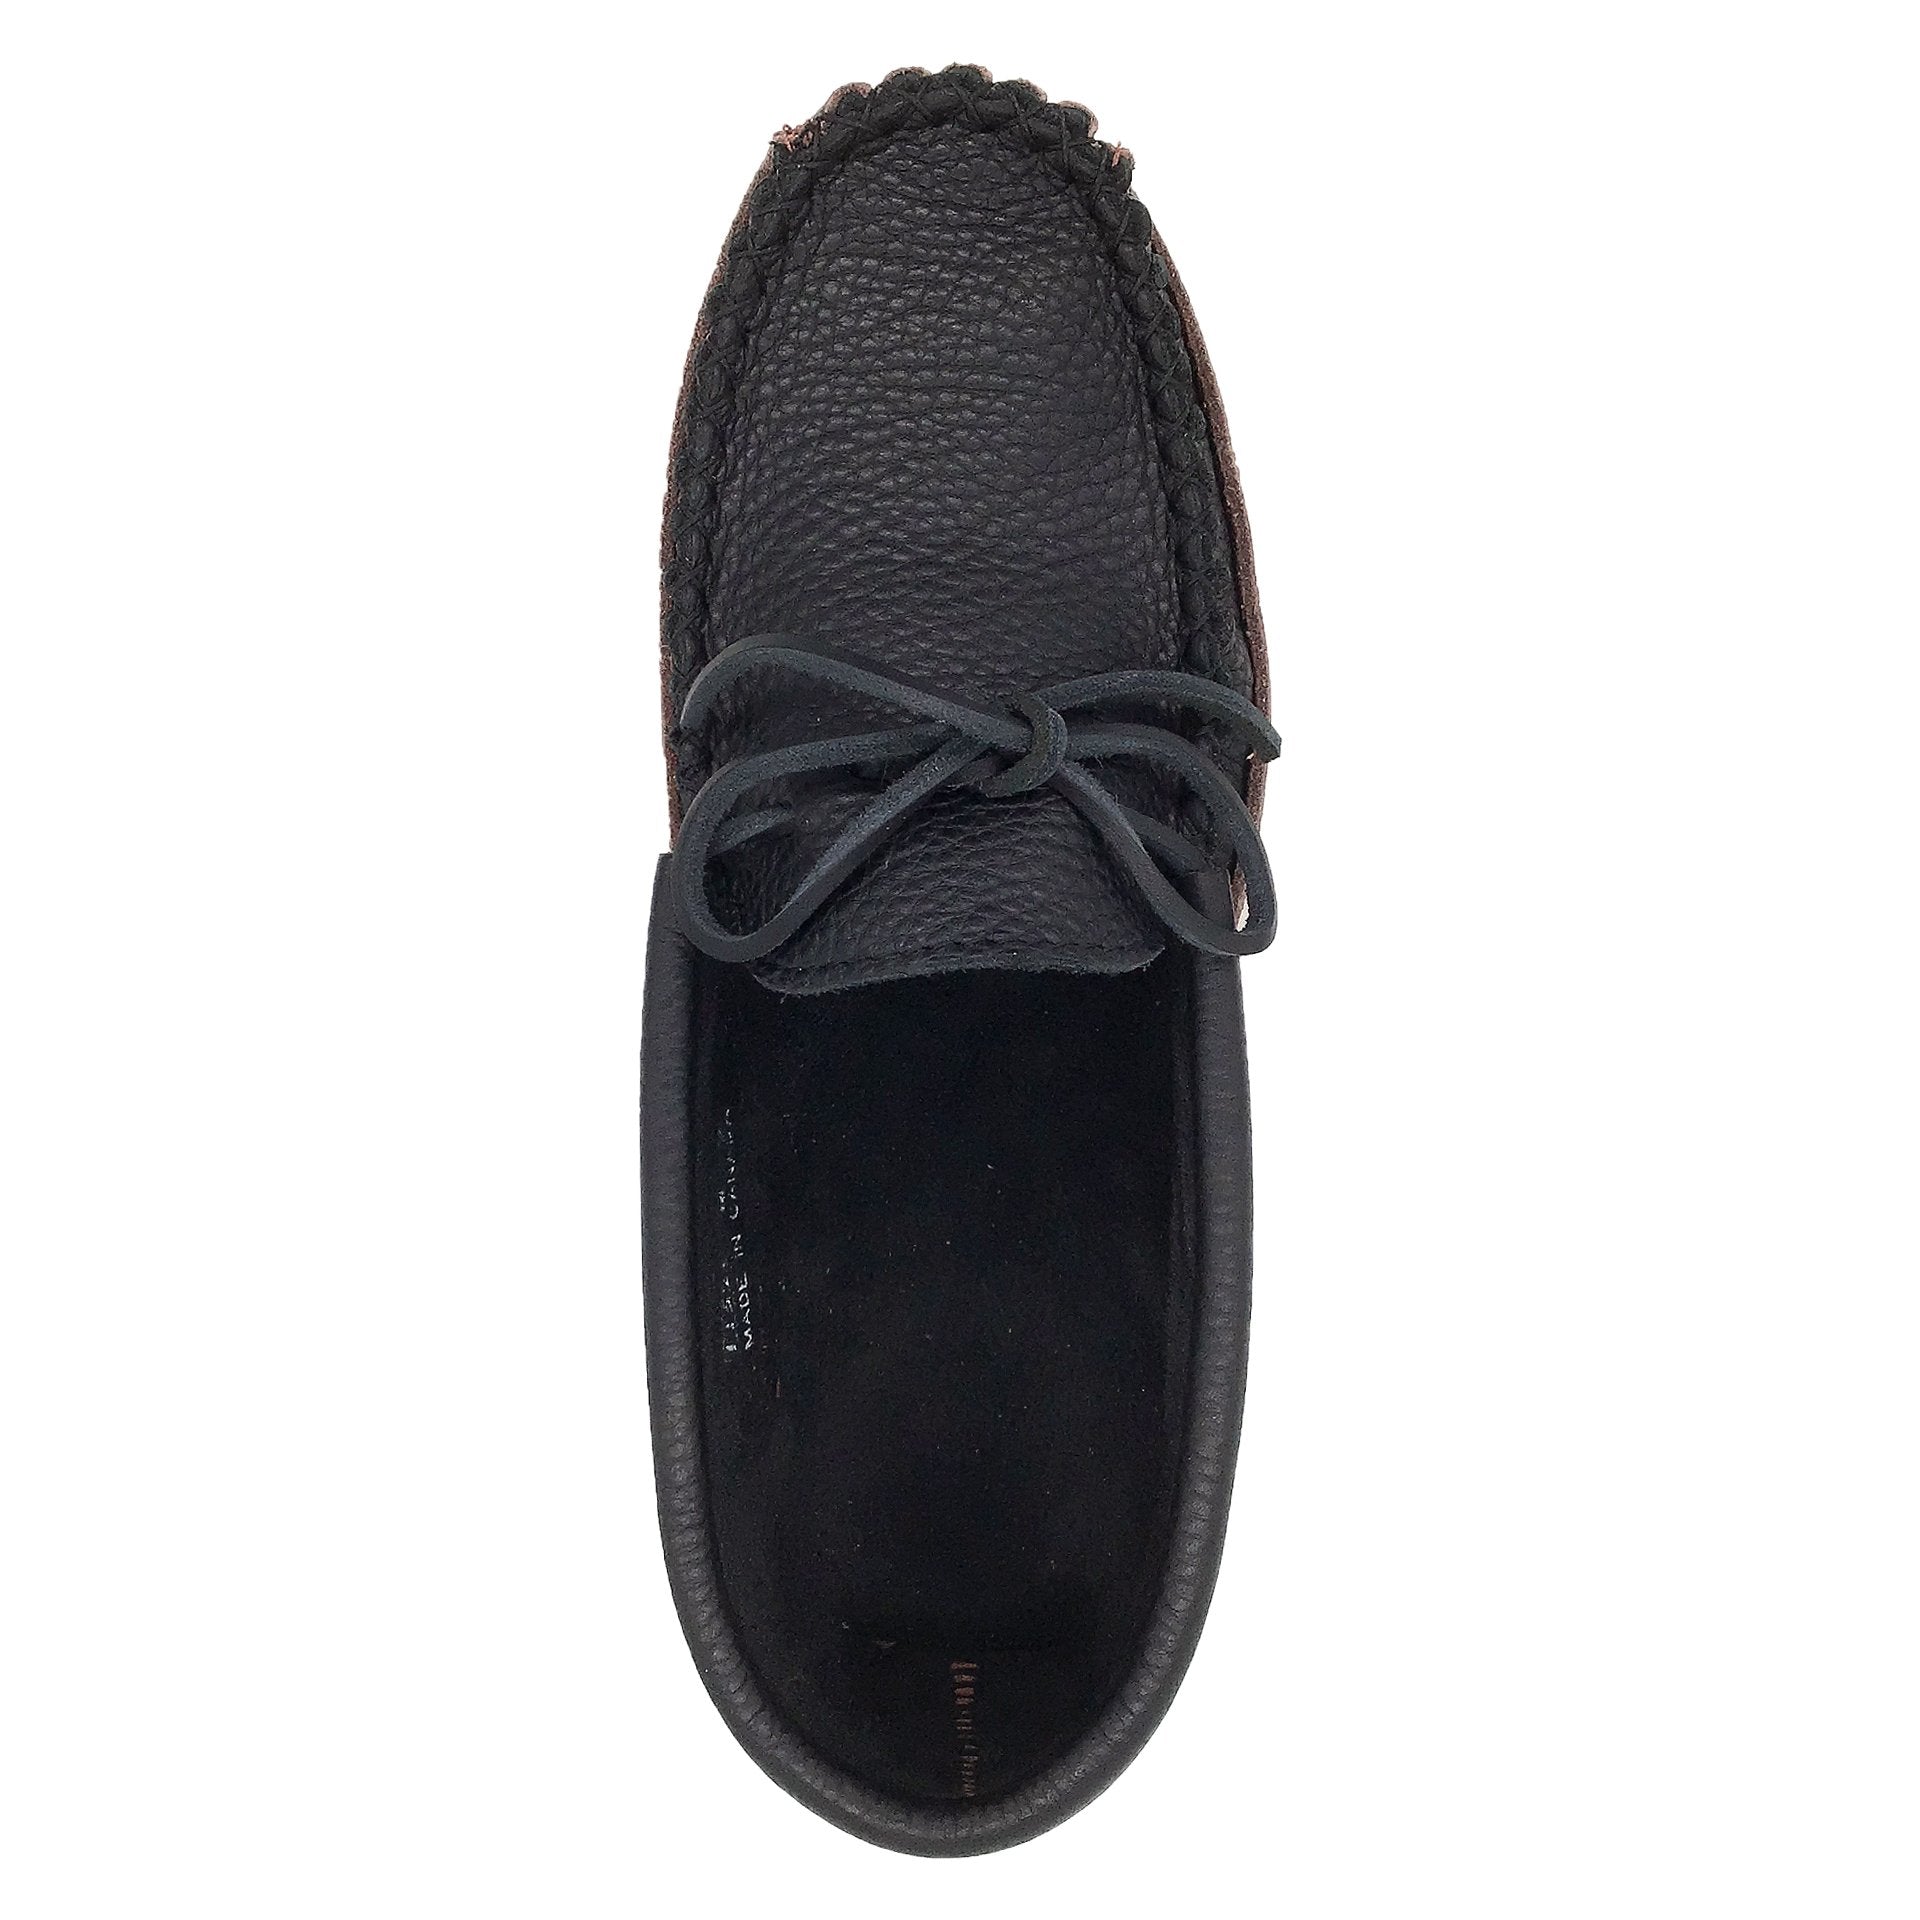 Men's Earthing Moccasins Black Leather (Final Clearance 14 ONLY)